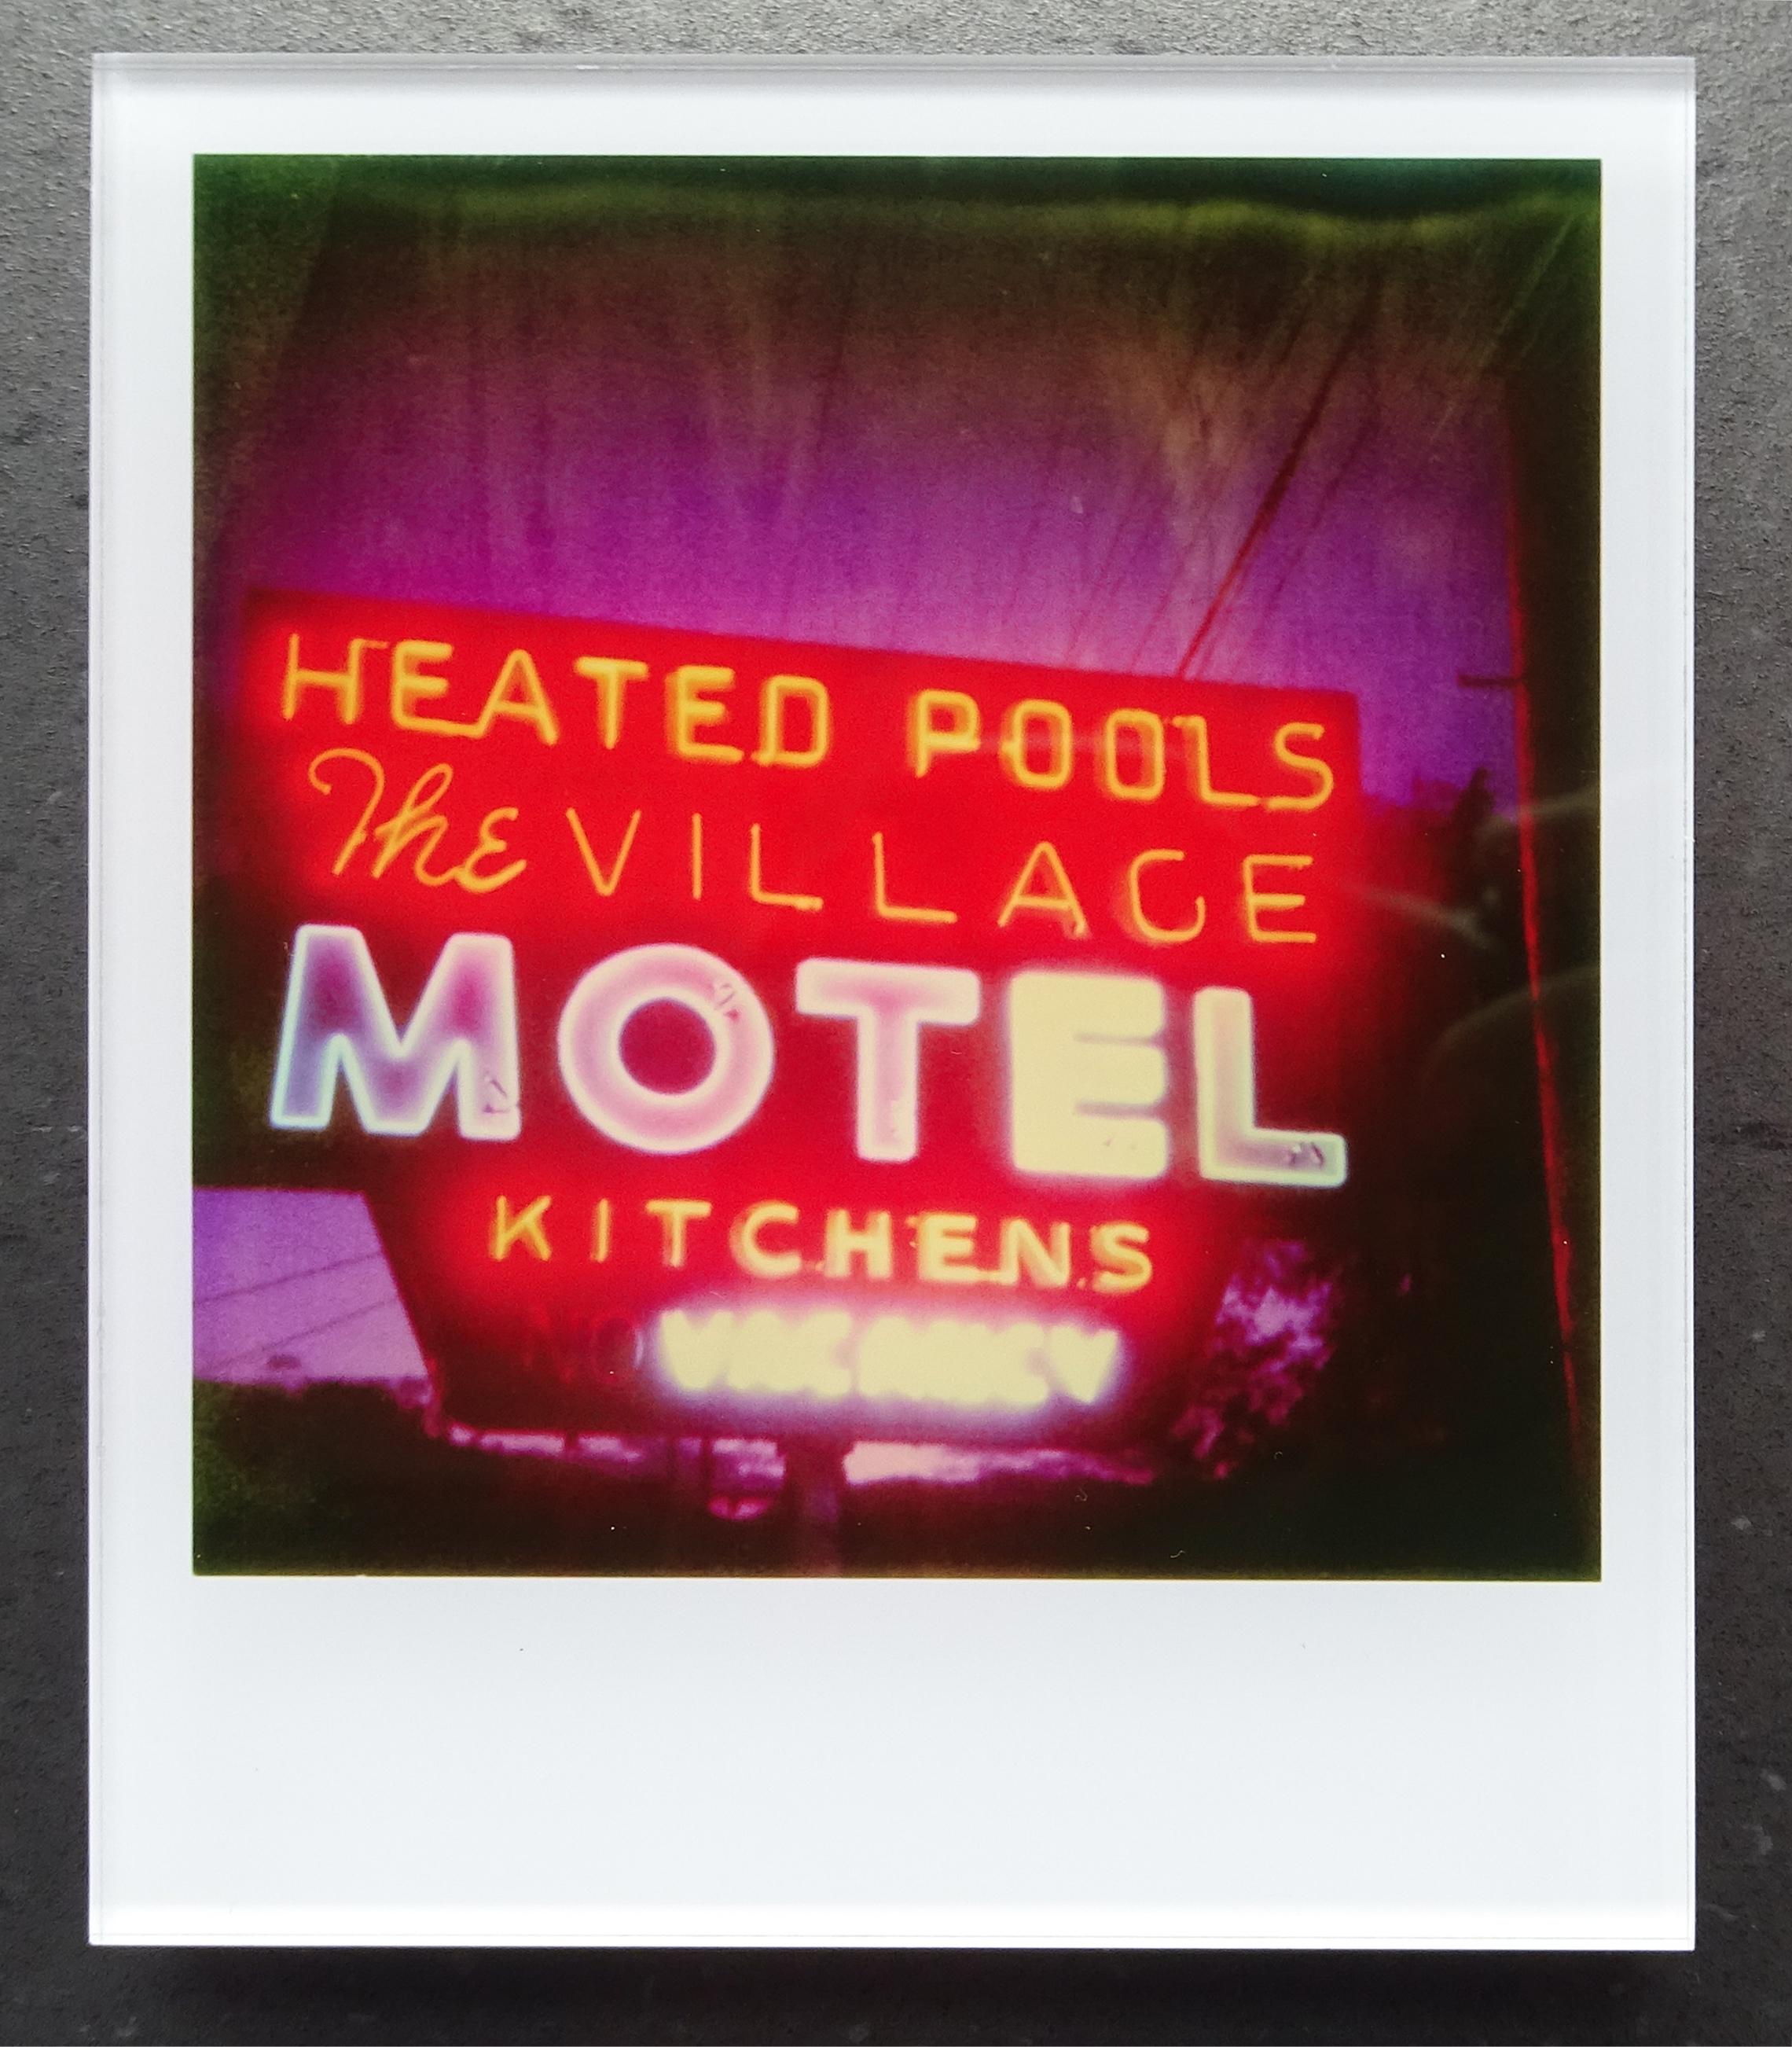 Stefanie Schneider's Minis
Village Motel Heated Pool (The last Picture Show), 2009

Signed and signature brand on verso.
Lambda digital Color Photographs based on the Polaroid.
Sandwiched in between Plexiglass (thickness 0.7cm)

Polaroid sized open